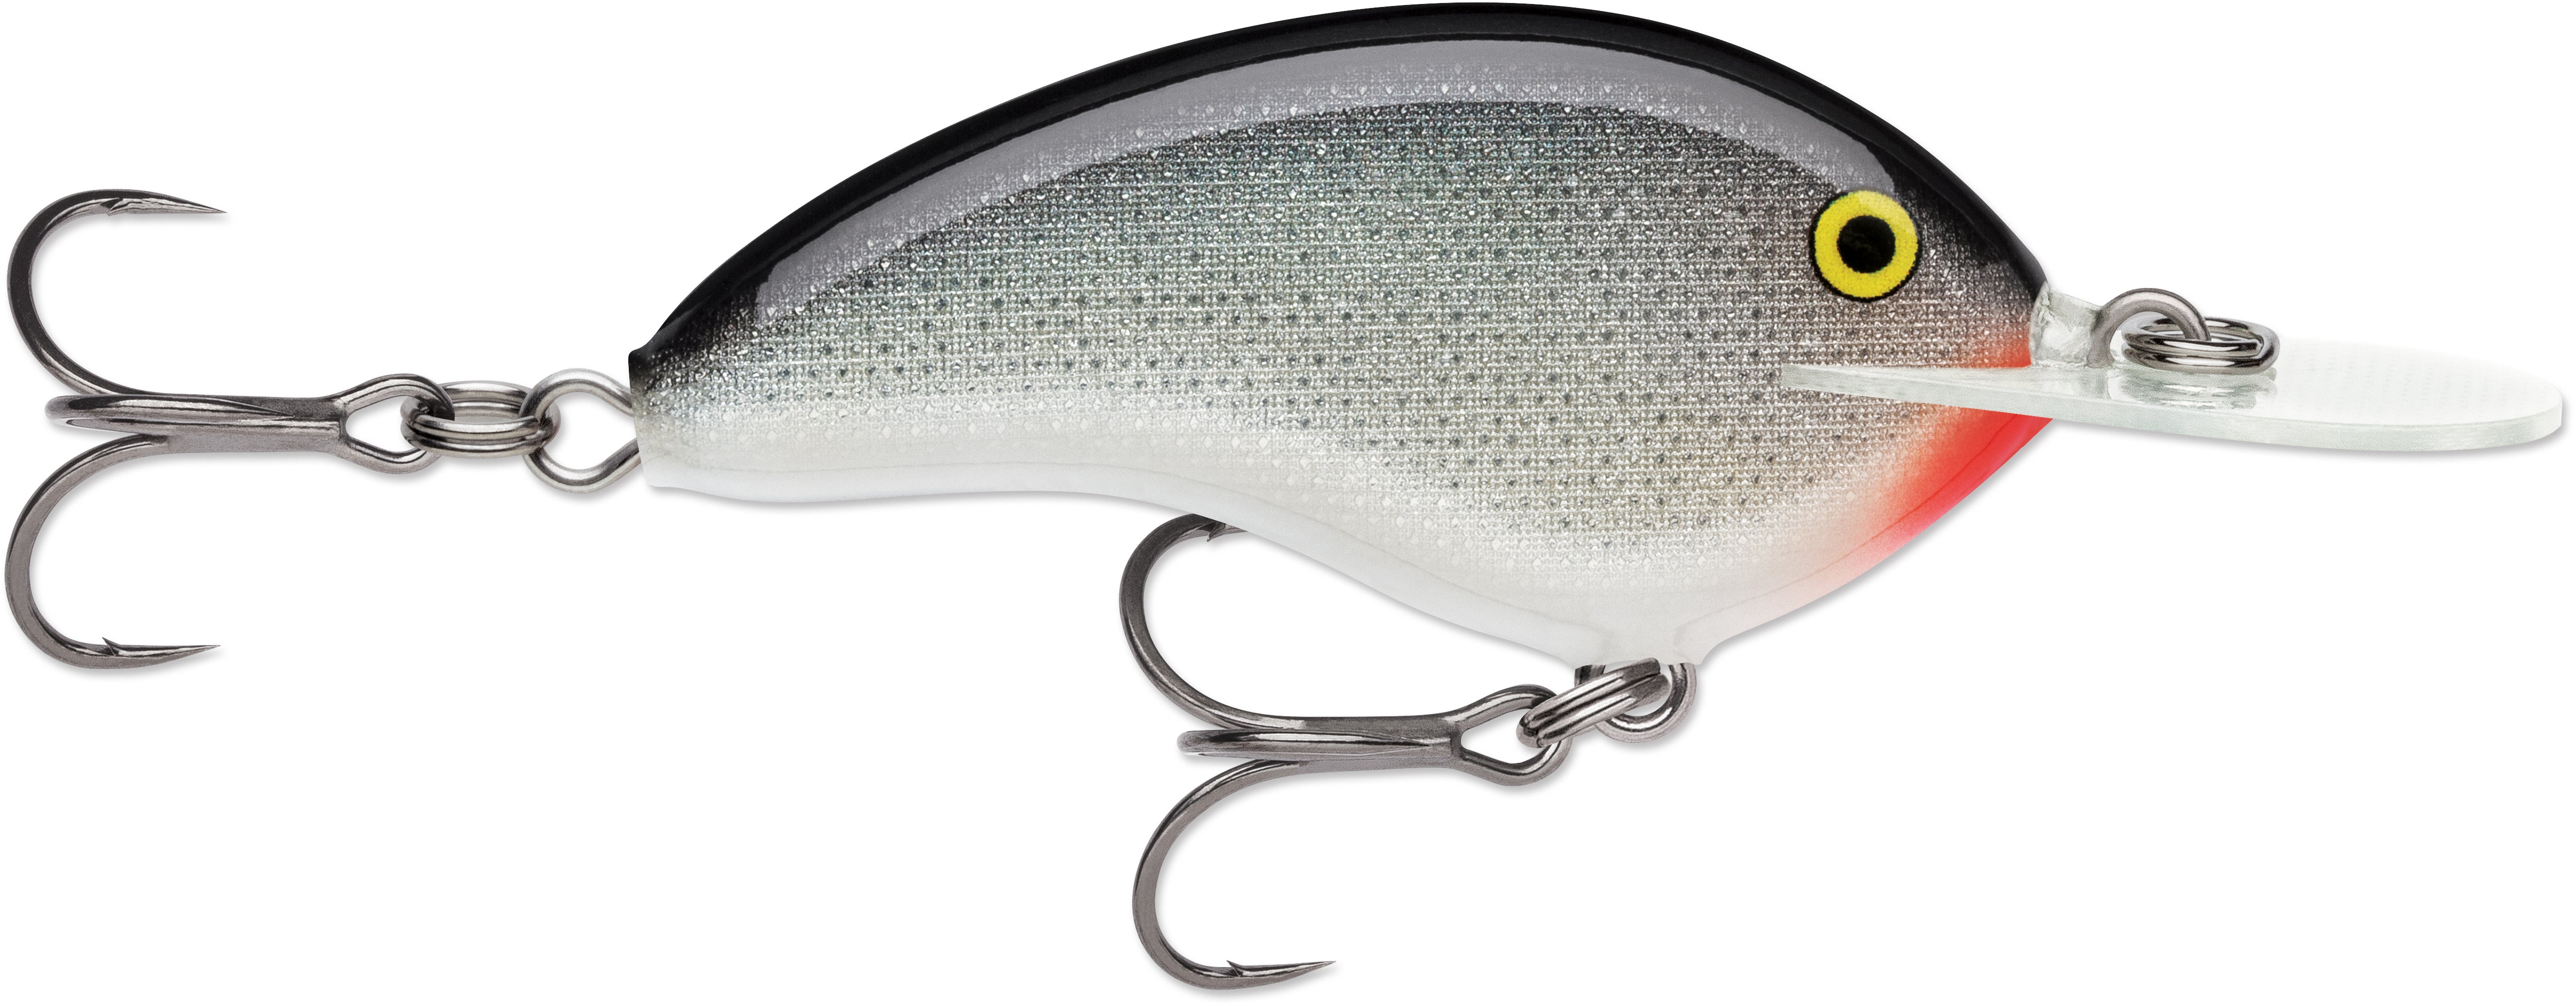 2.8 inch crankbait fishing lure by Otto Bartley